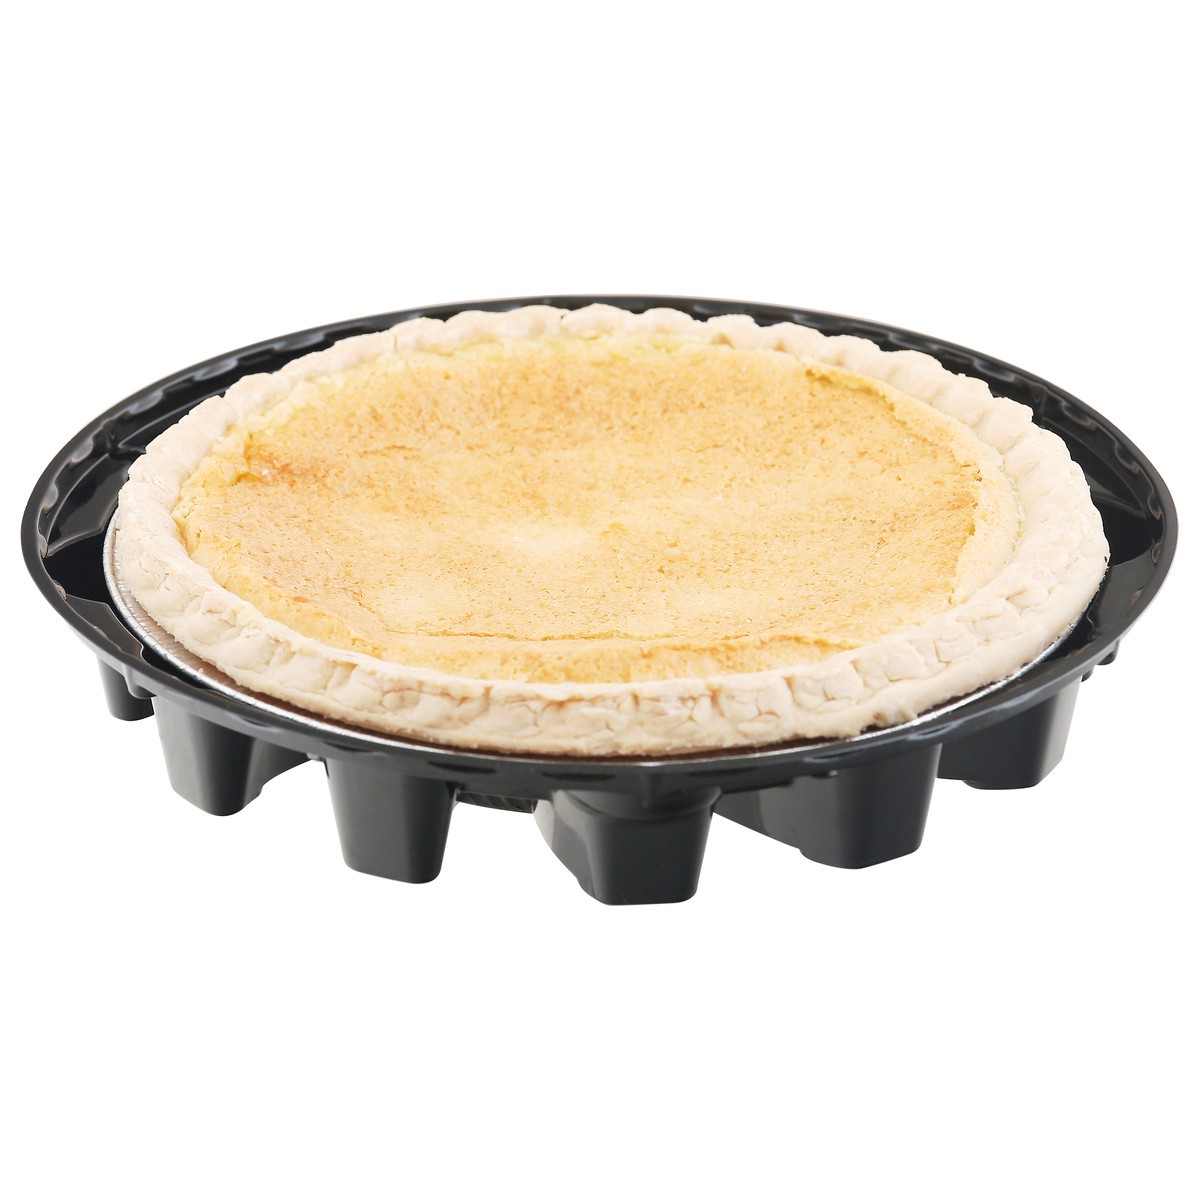 slide 1 of 11, Quality Bakery Products 8 Inch Buttermilk Chess Pie 23 oz Tray, 22 oz